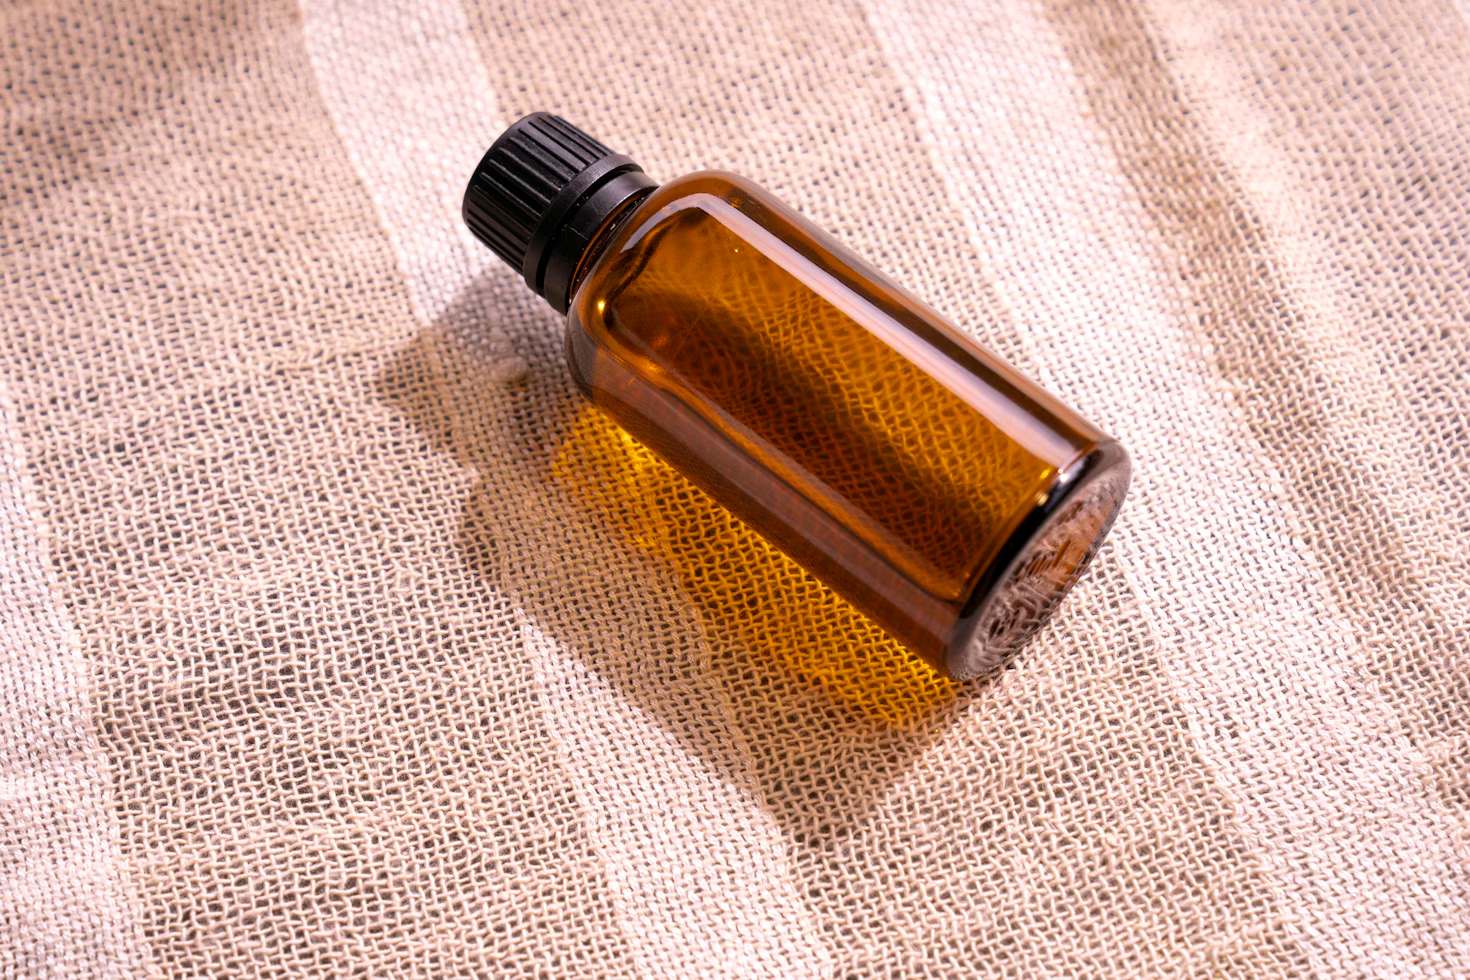 A bottle of essential oil sitting on a cloth